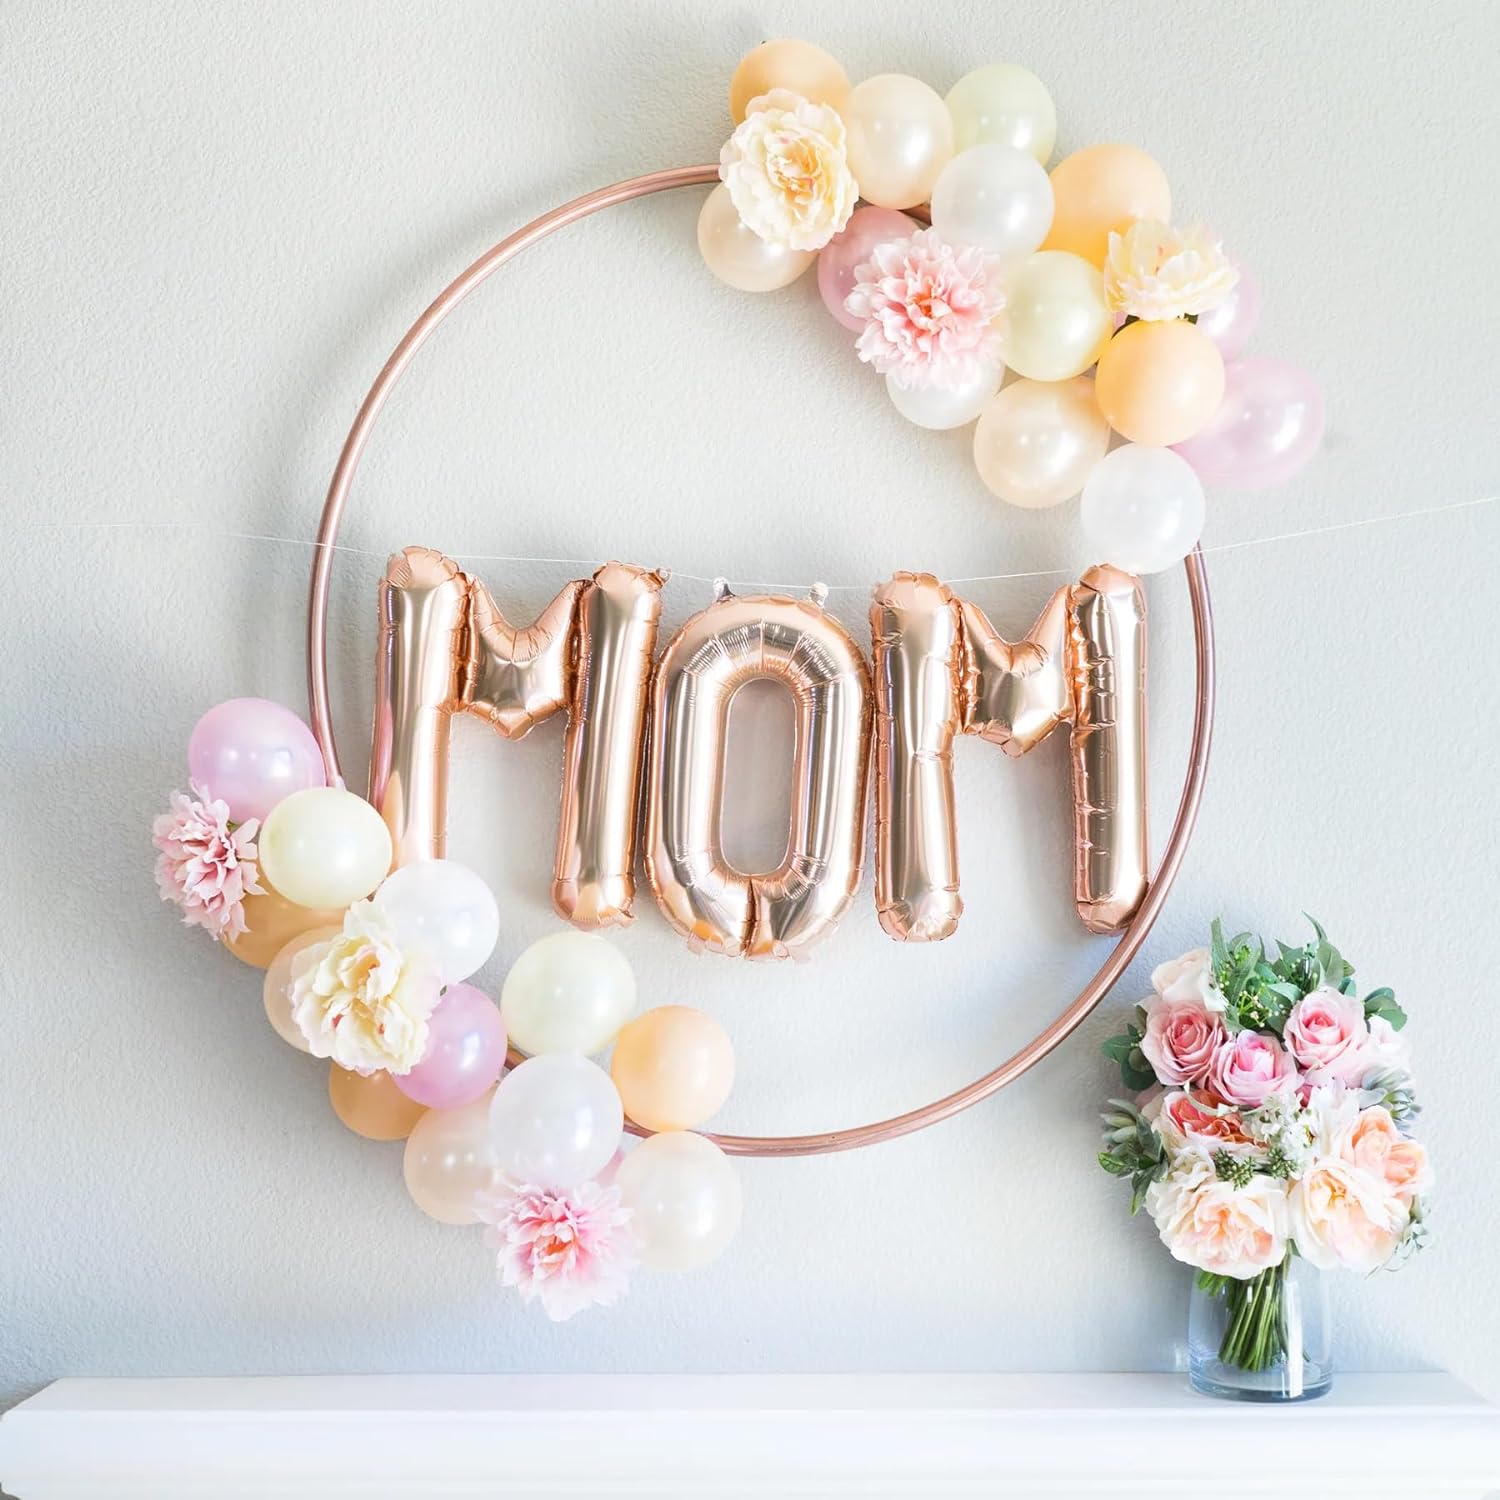 Make every day special for your mother